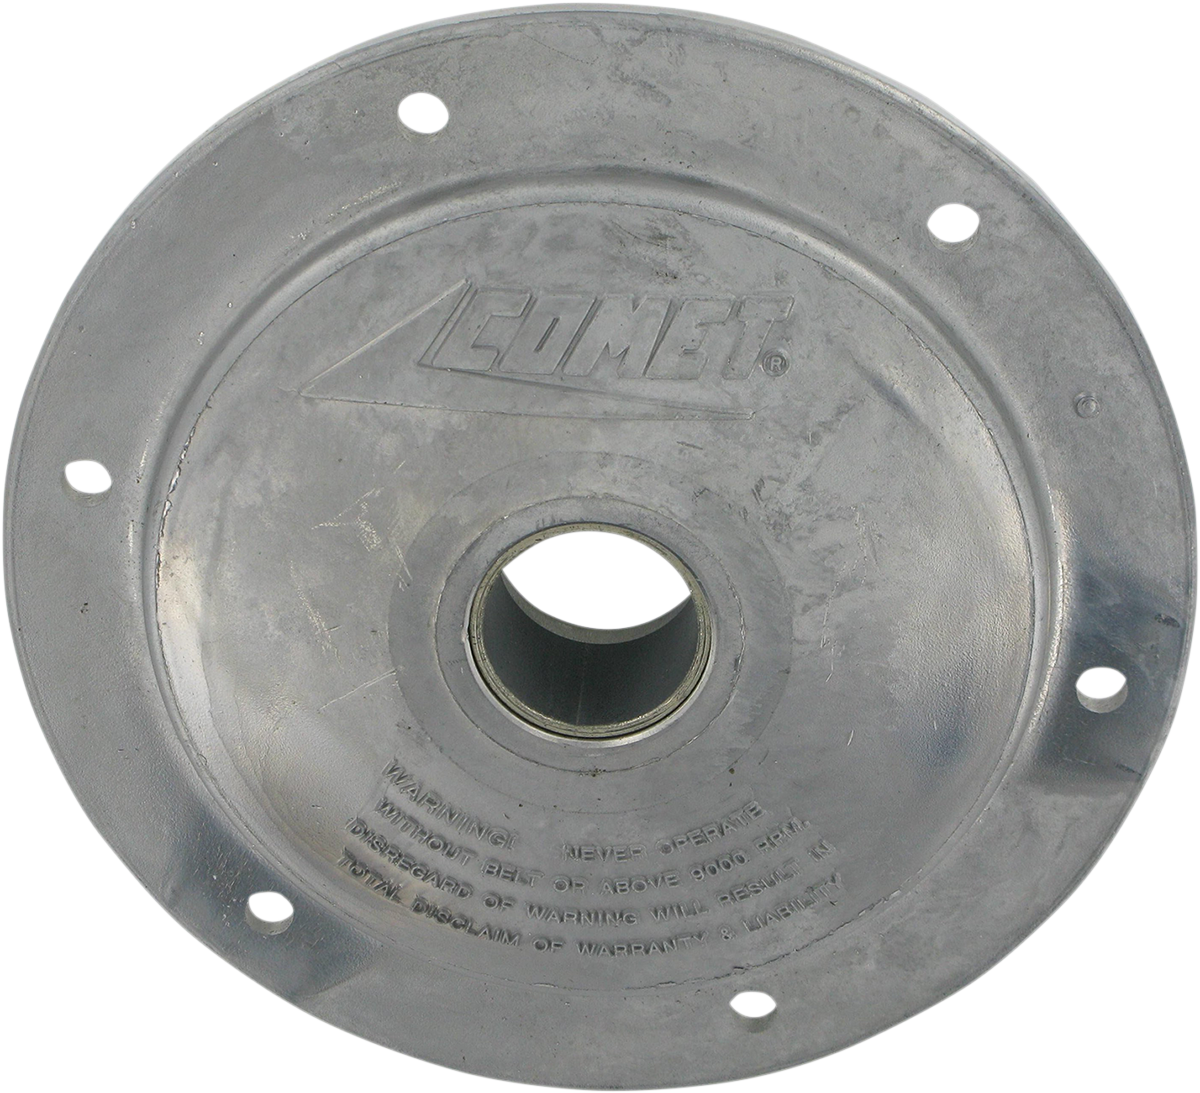 COMET - COVER PLATE 108 EXP - 215300A